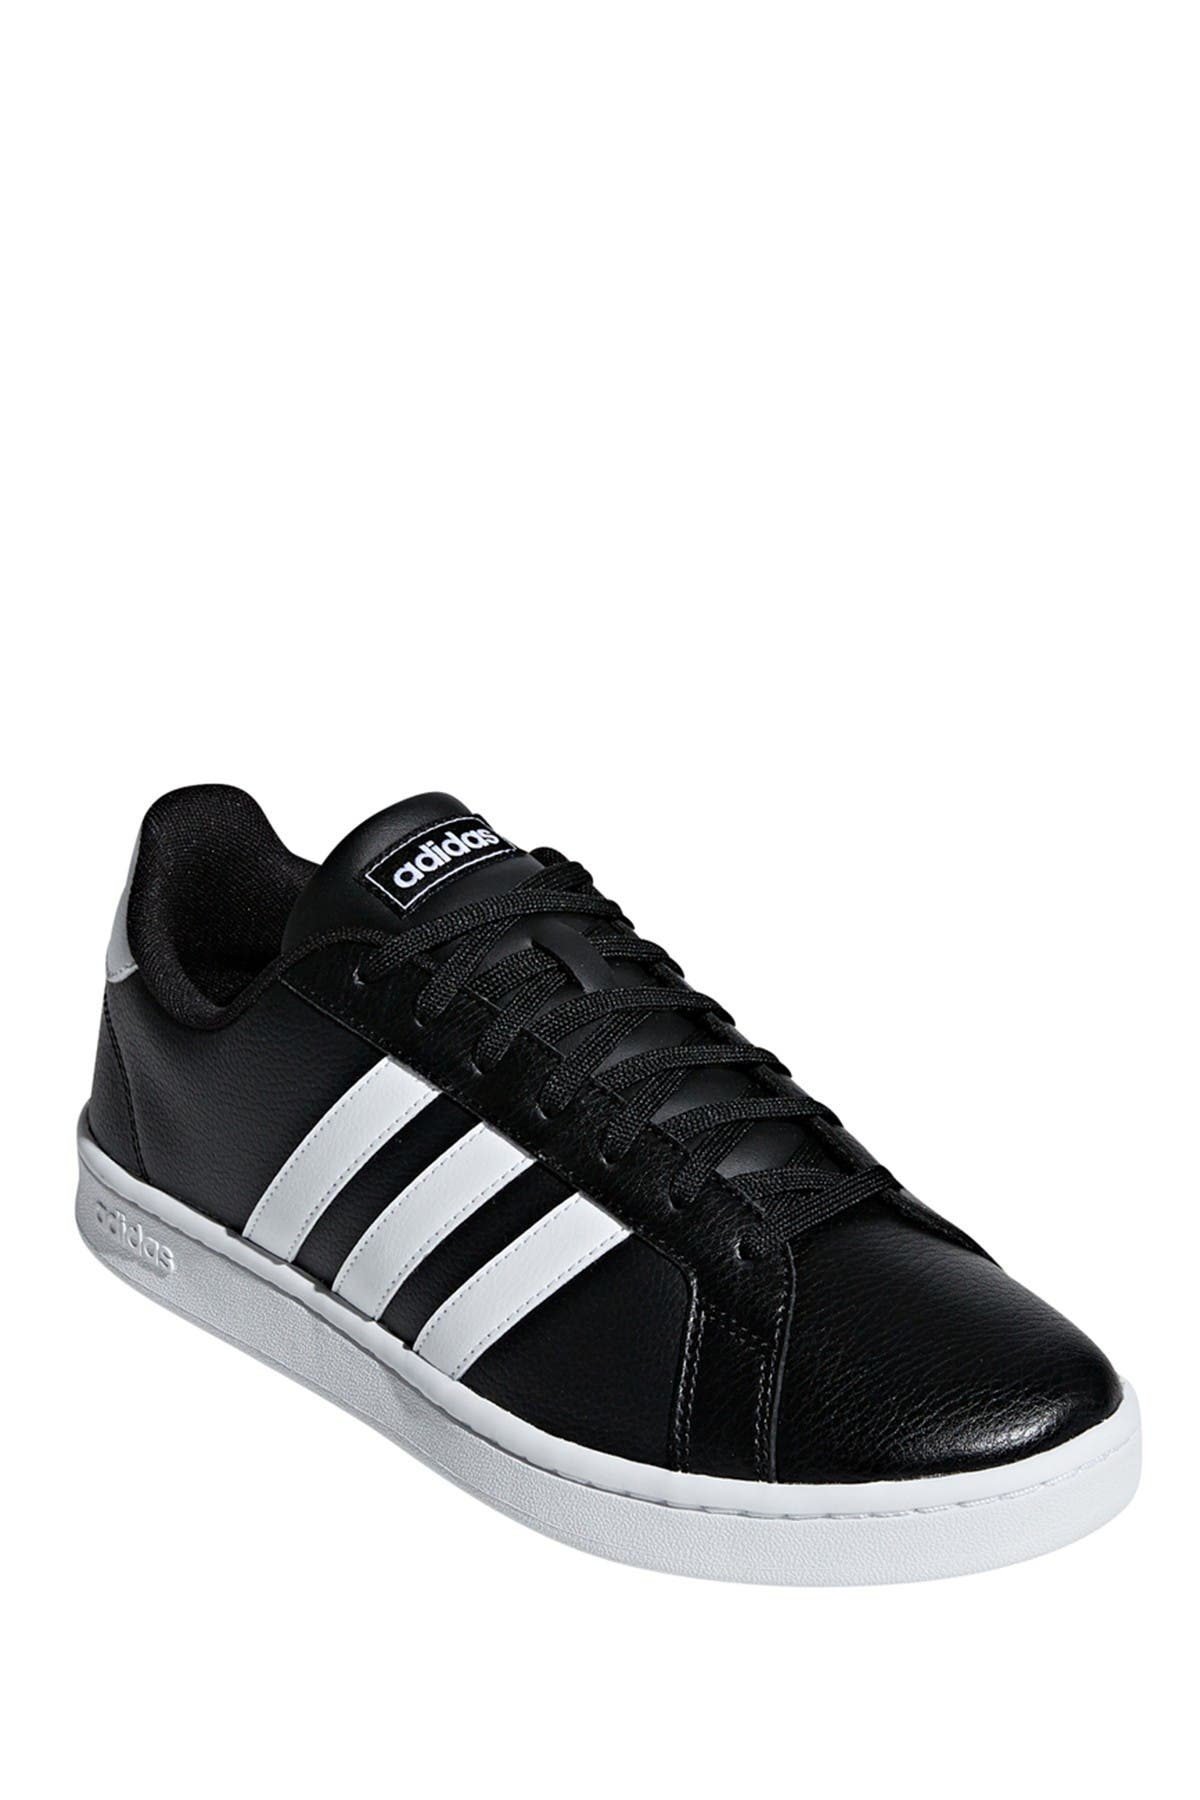 adidas grand court leather